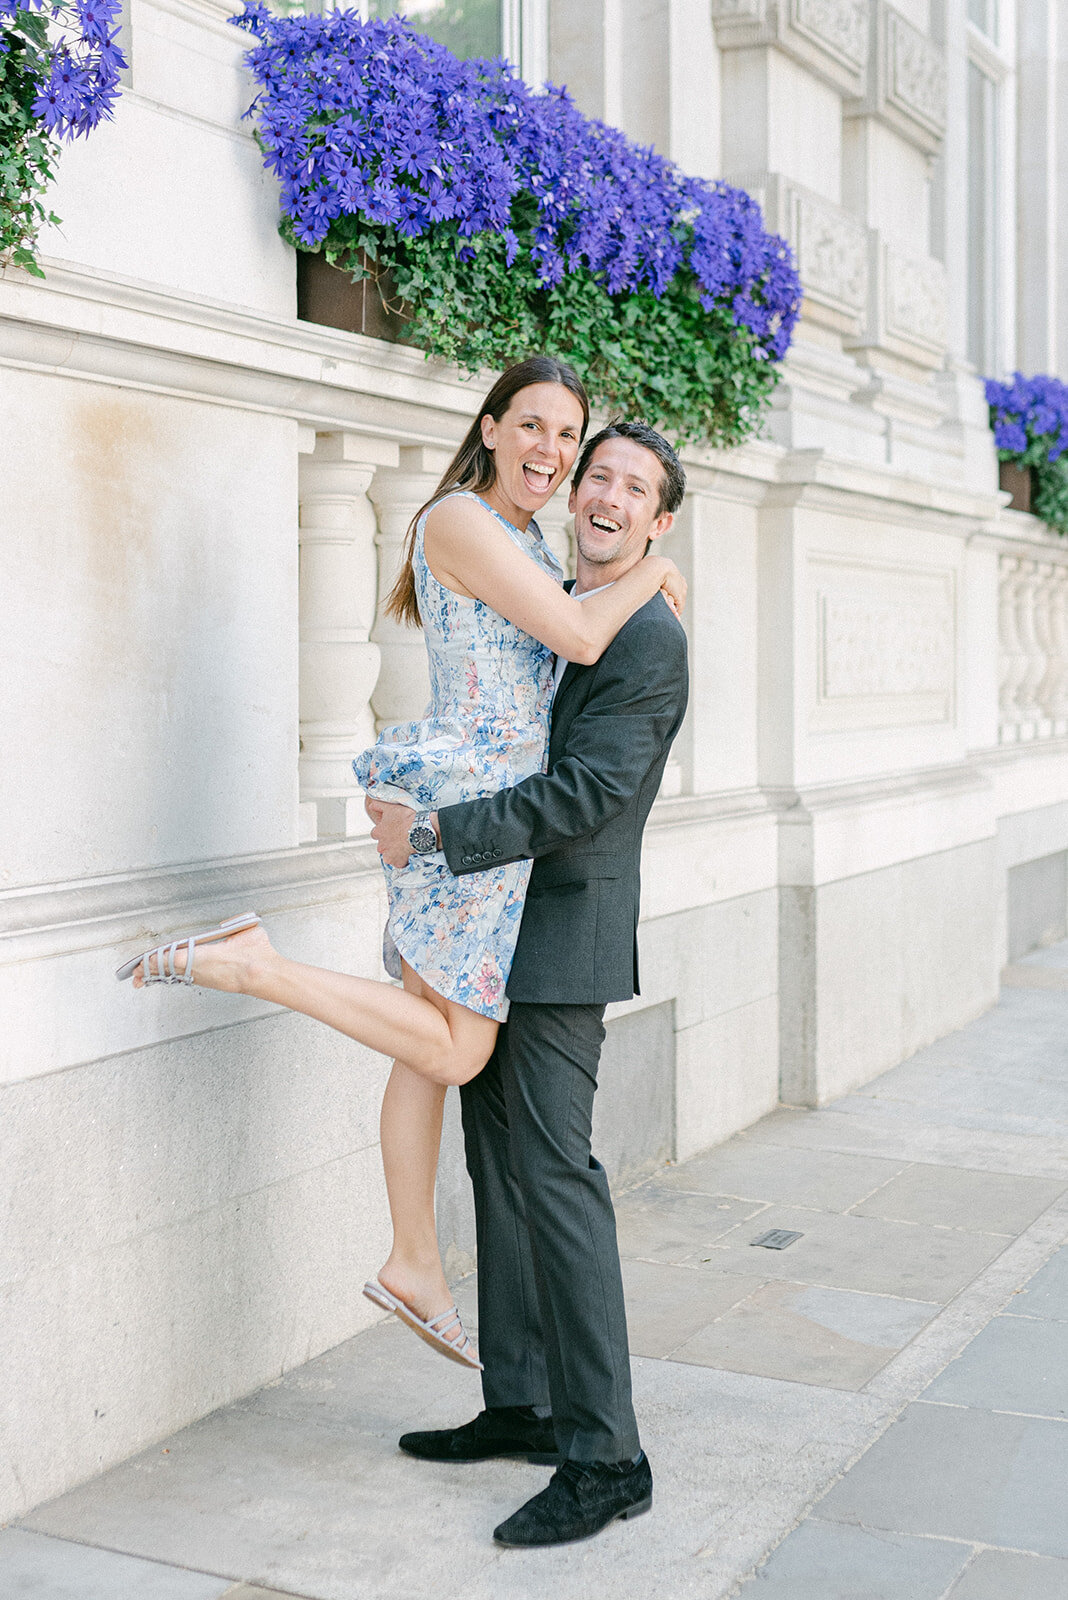 Engagement Photoshoot in London town